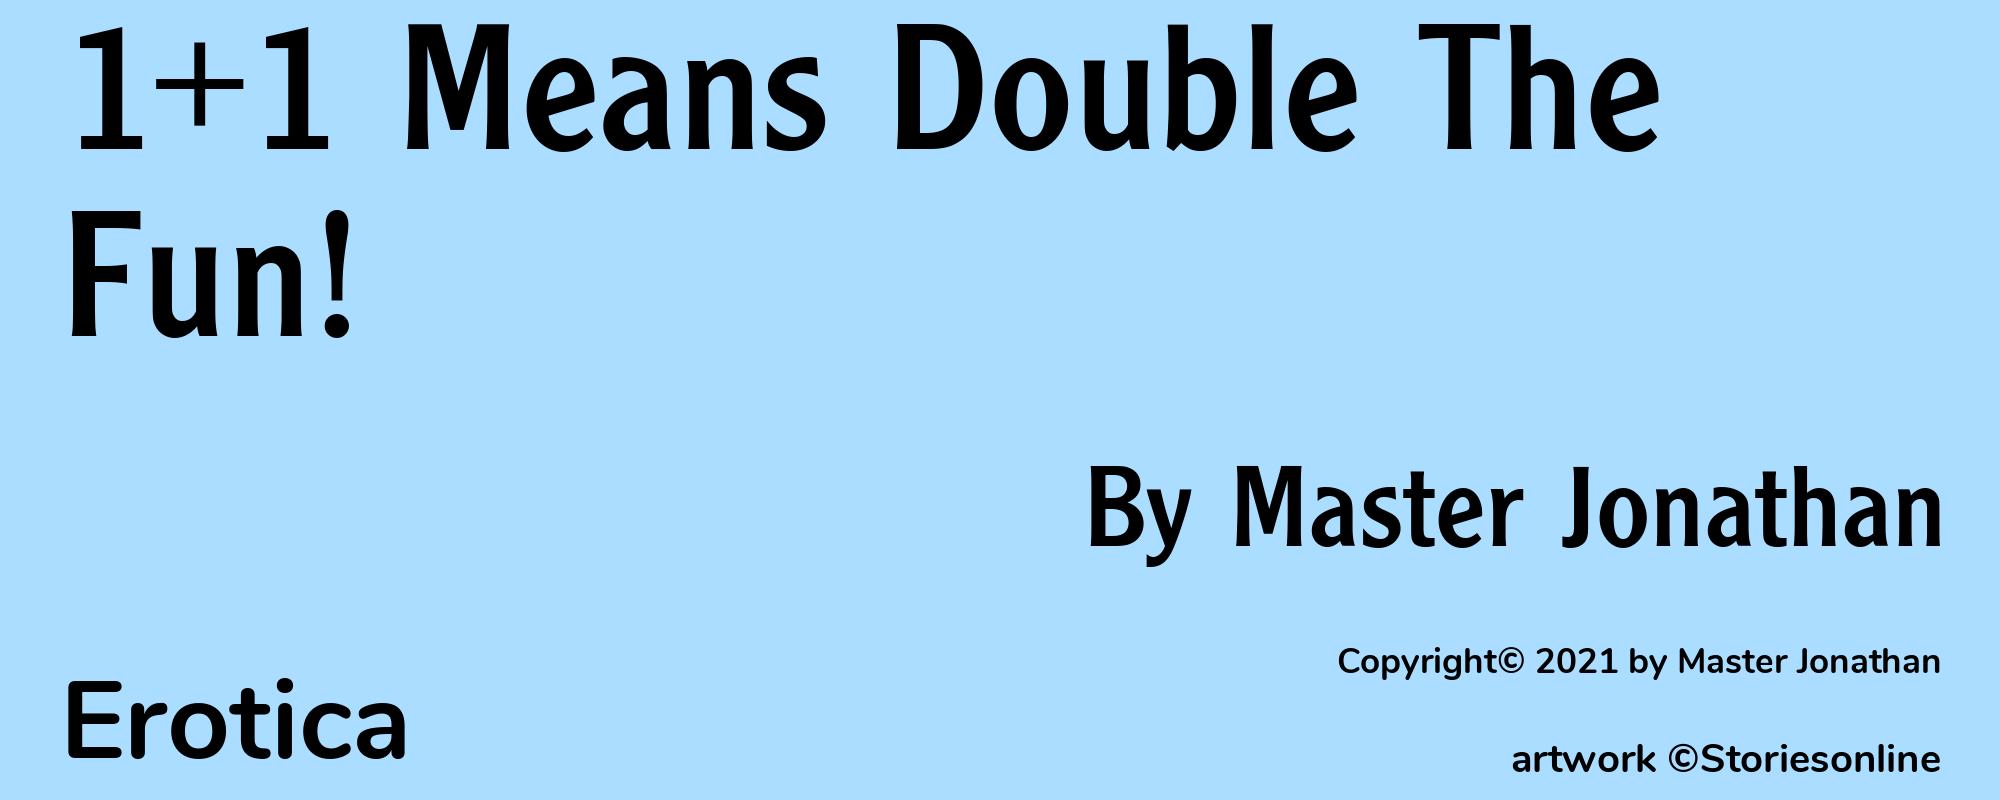 1+1 Means Double The Fun! - Cover